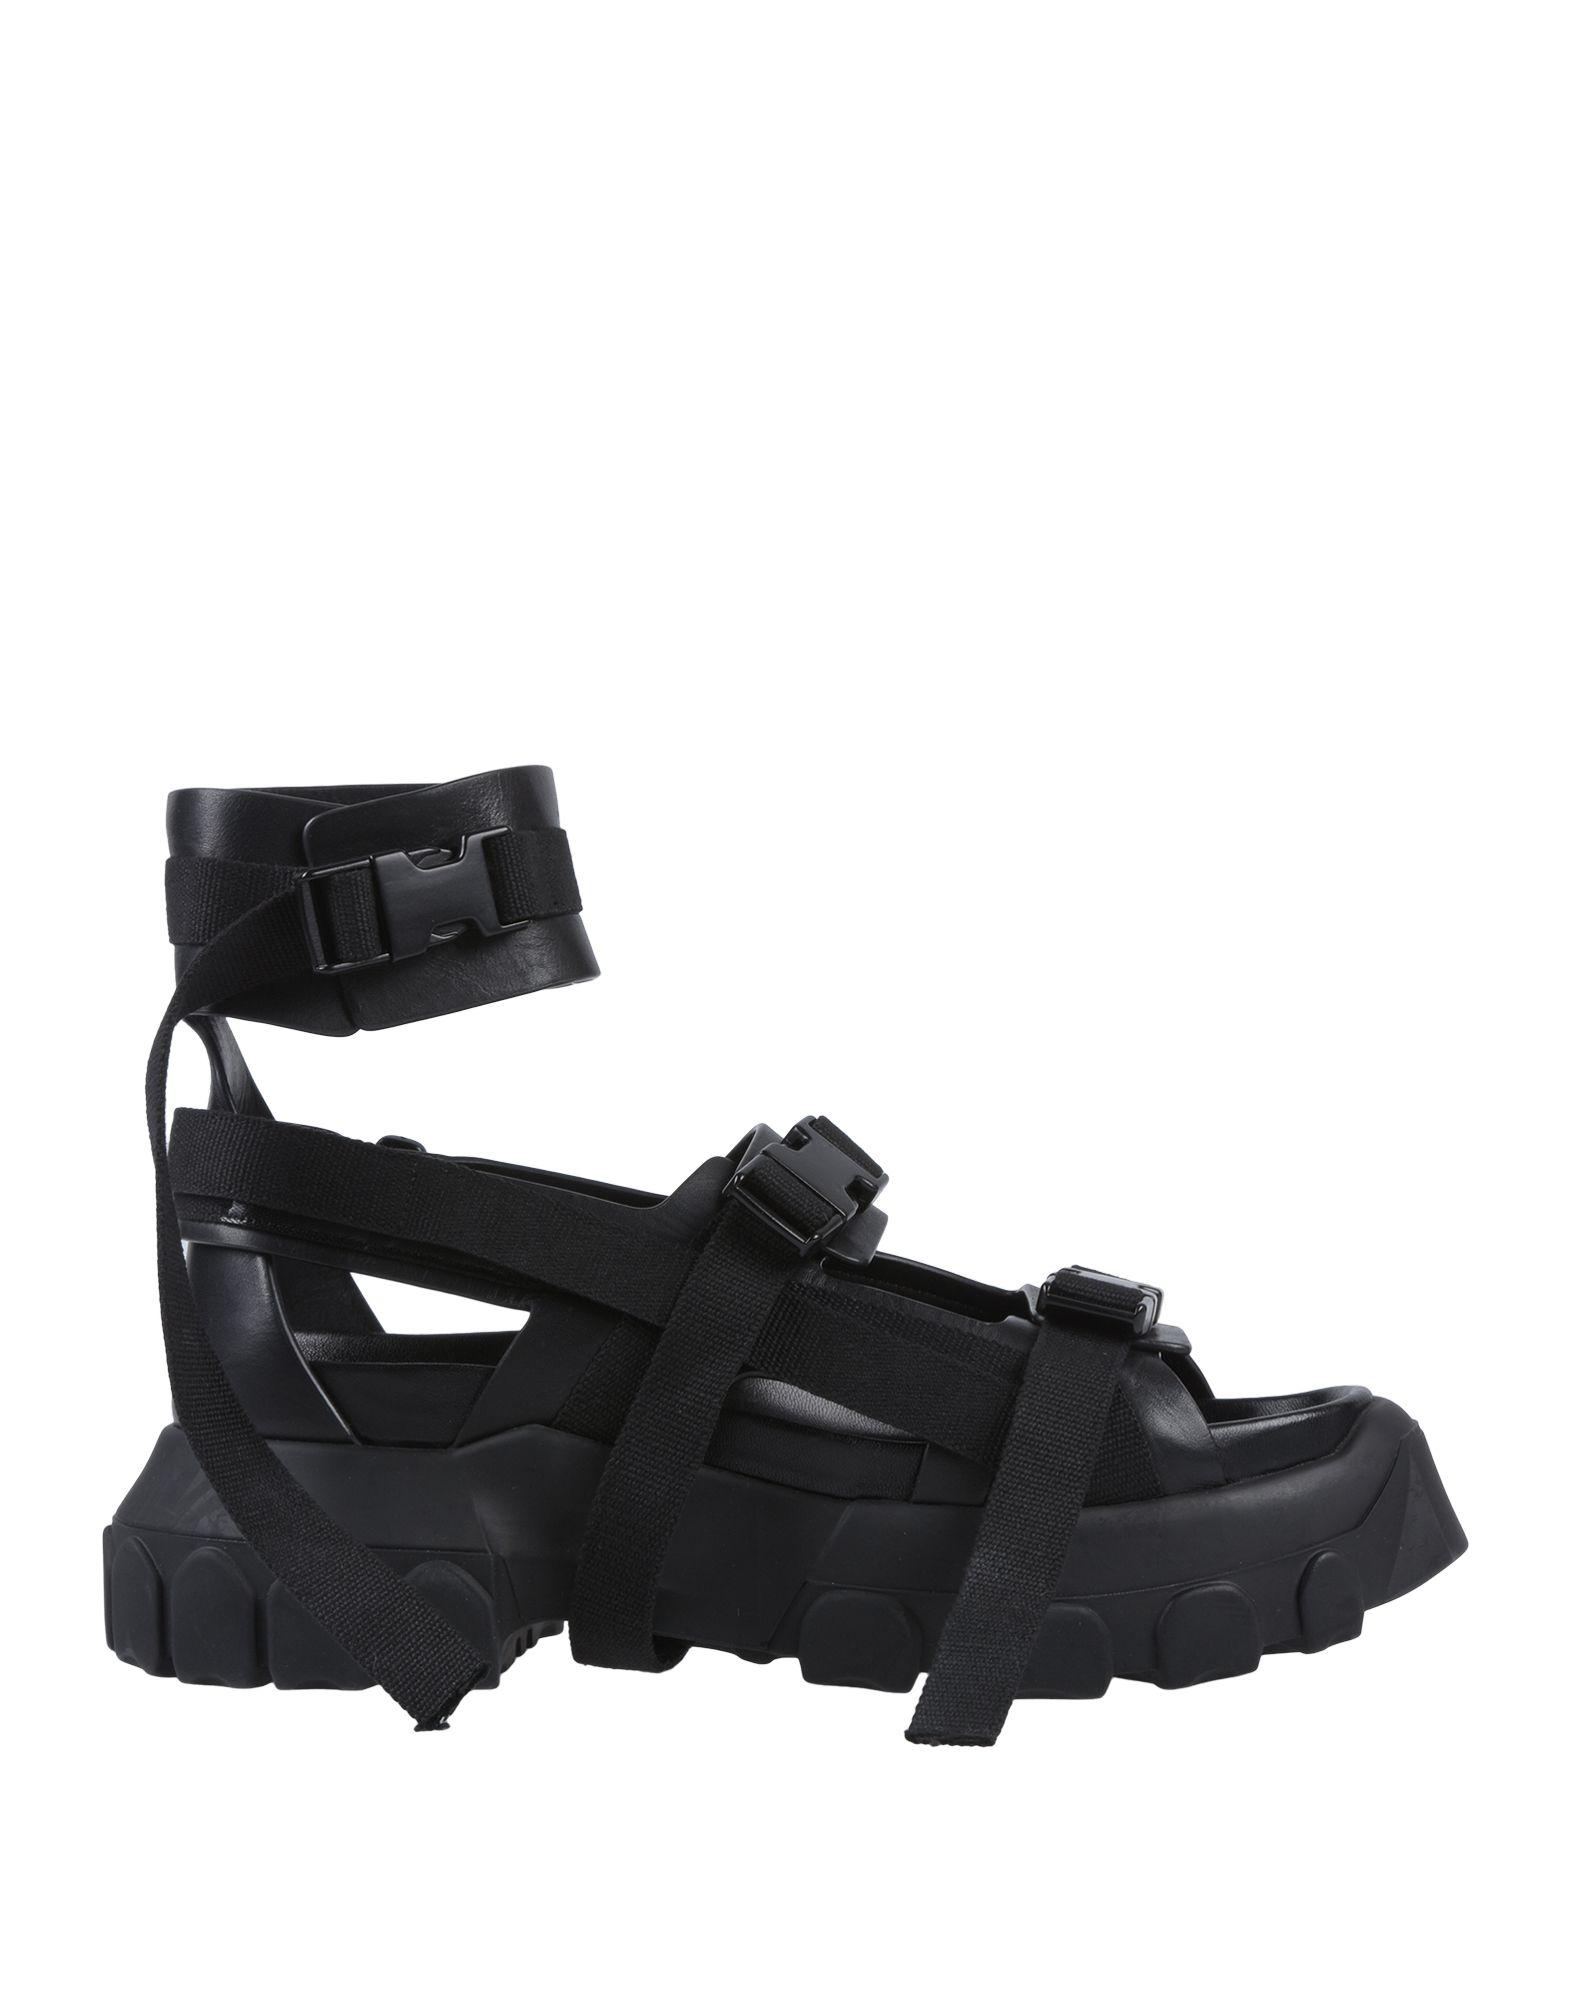 Rick Owens Leather Sandals in Black - Lyst